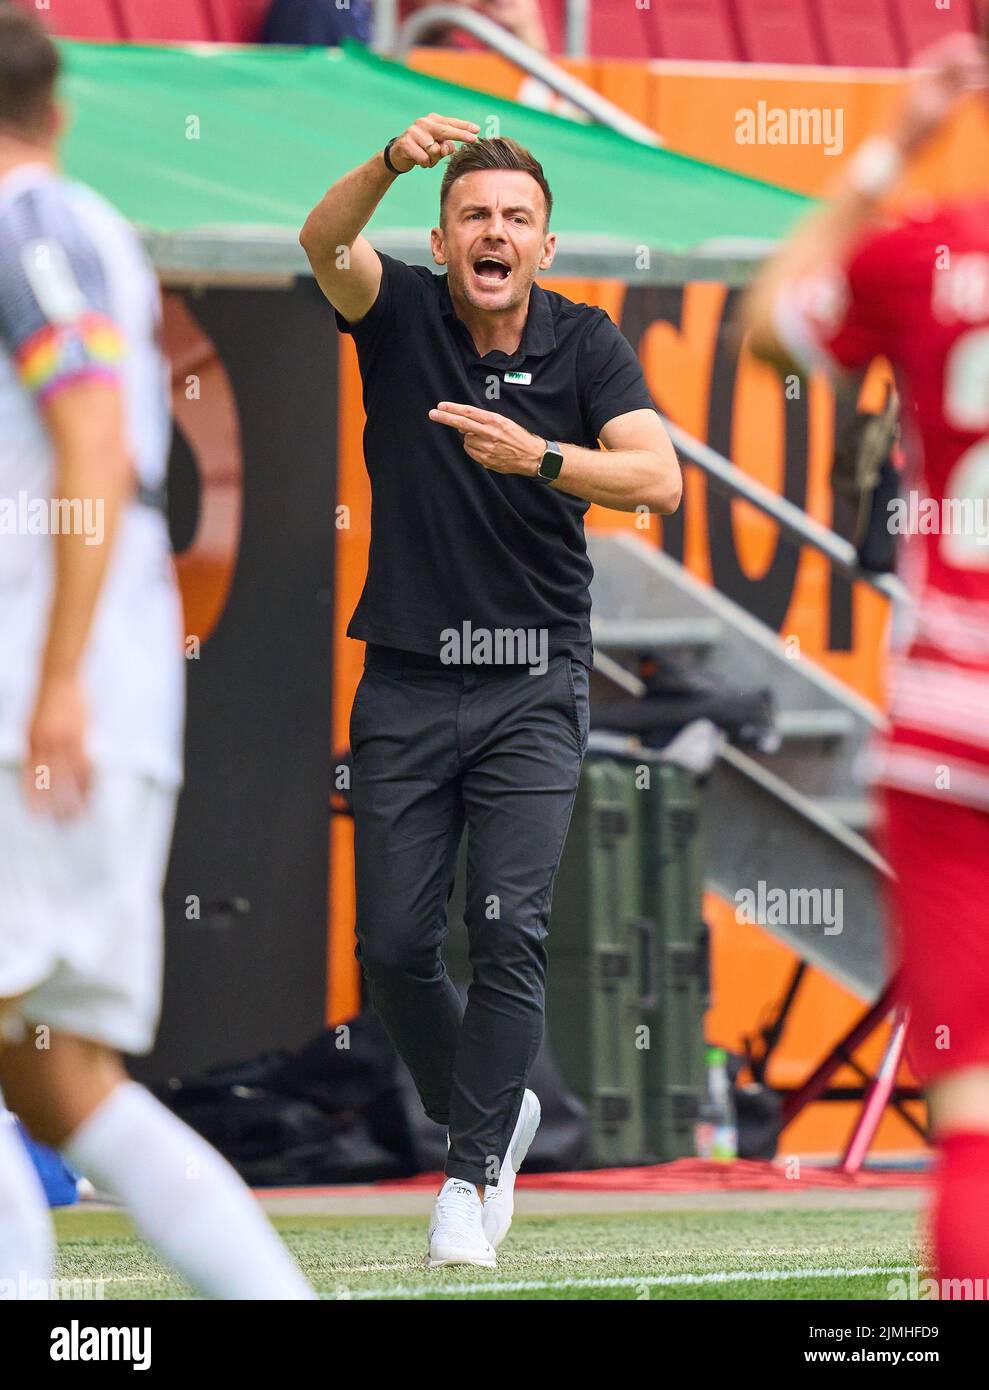 Enrico Maassen, FCA coach,  team manager, geste in the match FC AUGSBURG - SC FREIBURG 0-4 1.German Football League on Aug 06, 2022 in Augsburg, Germany. Season 2022/2023, matchday 1, 1.Bundesliga, FCB, Munich, 1.Spieltag © Peter Schatz / Alamy Live News    - DFL REGULATIONS PROHIBIT ANY USE OF PHOTOGRAPHS as IMAGE SEQUENCES and/or QUASI-VIDEO - Stock Photo